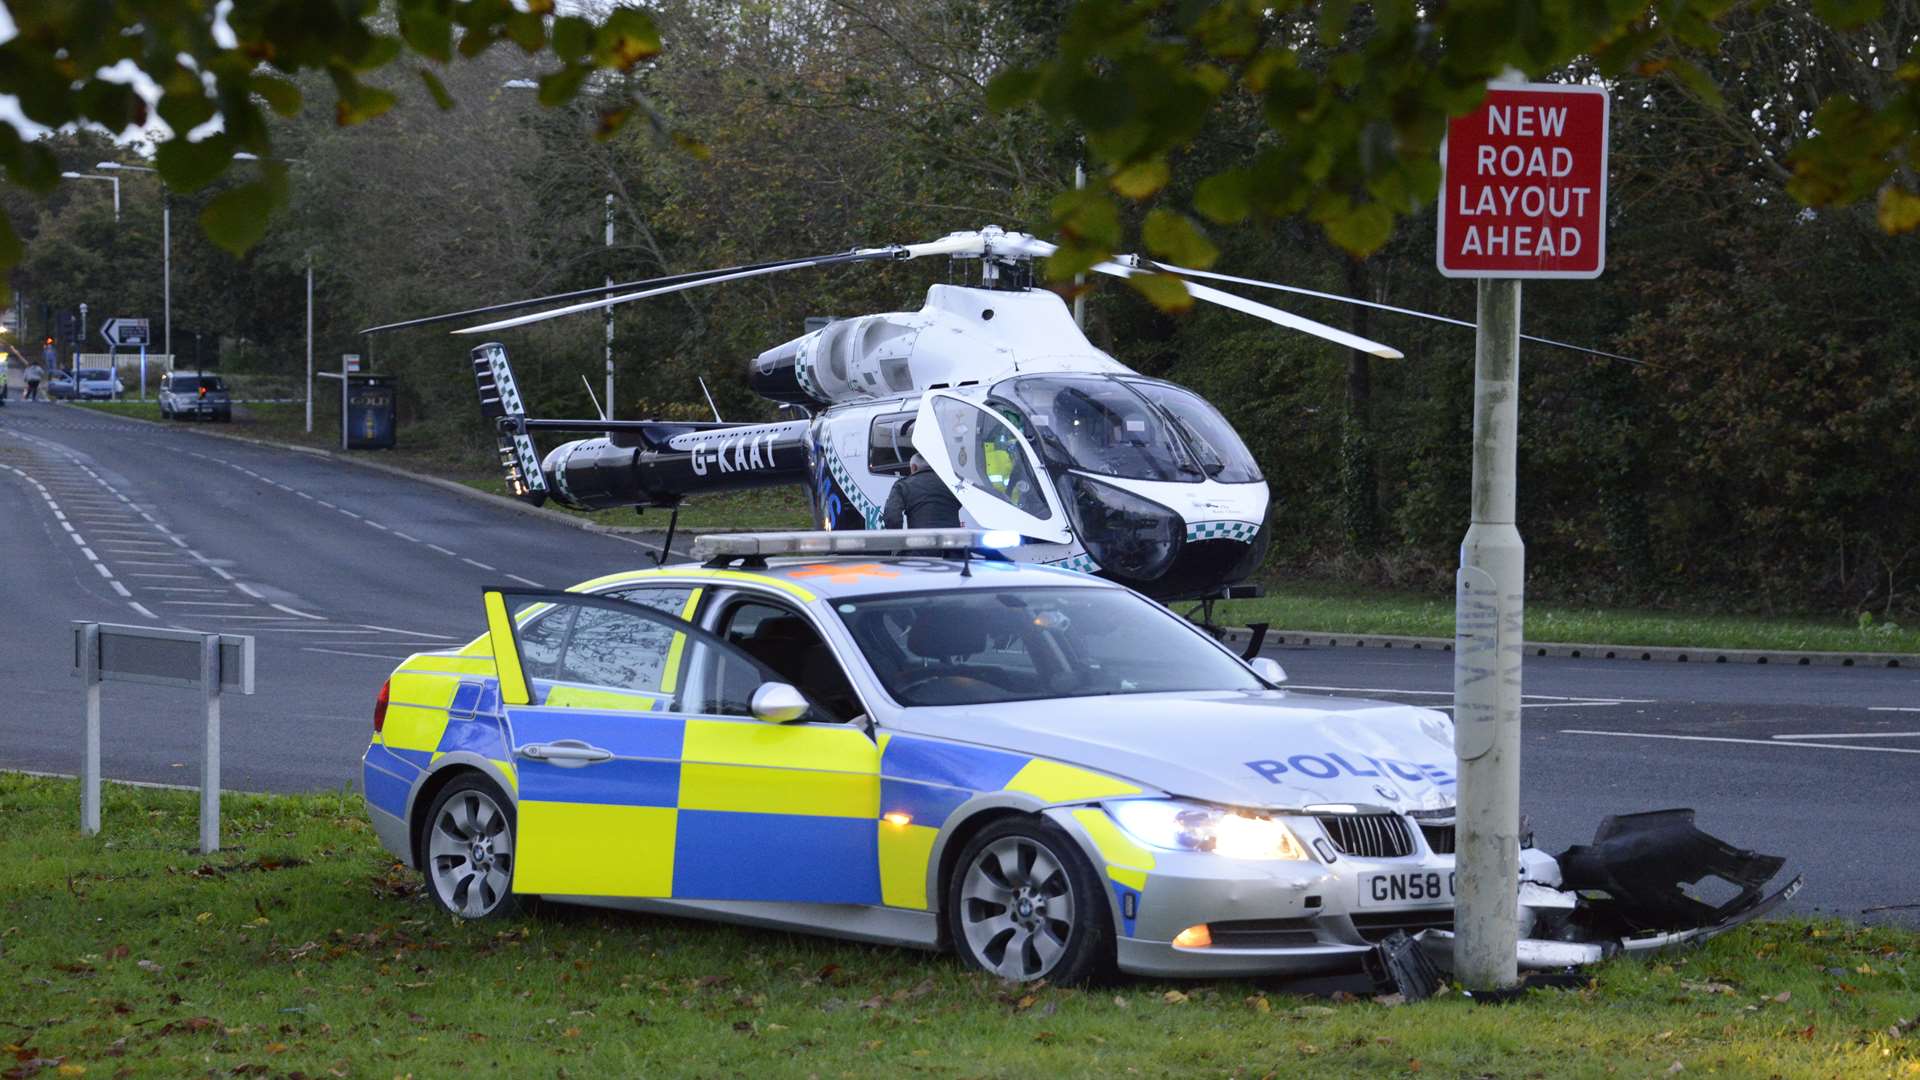 The air ambulance was called after a police car collided with a lampost in Ashford, which happened before the most recent figures